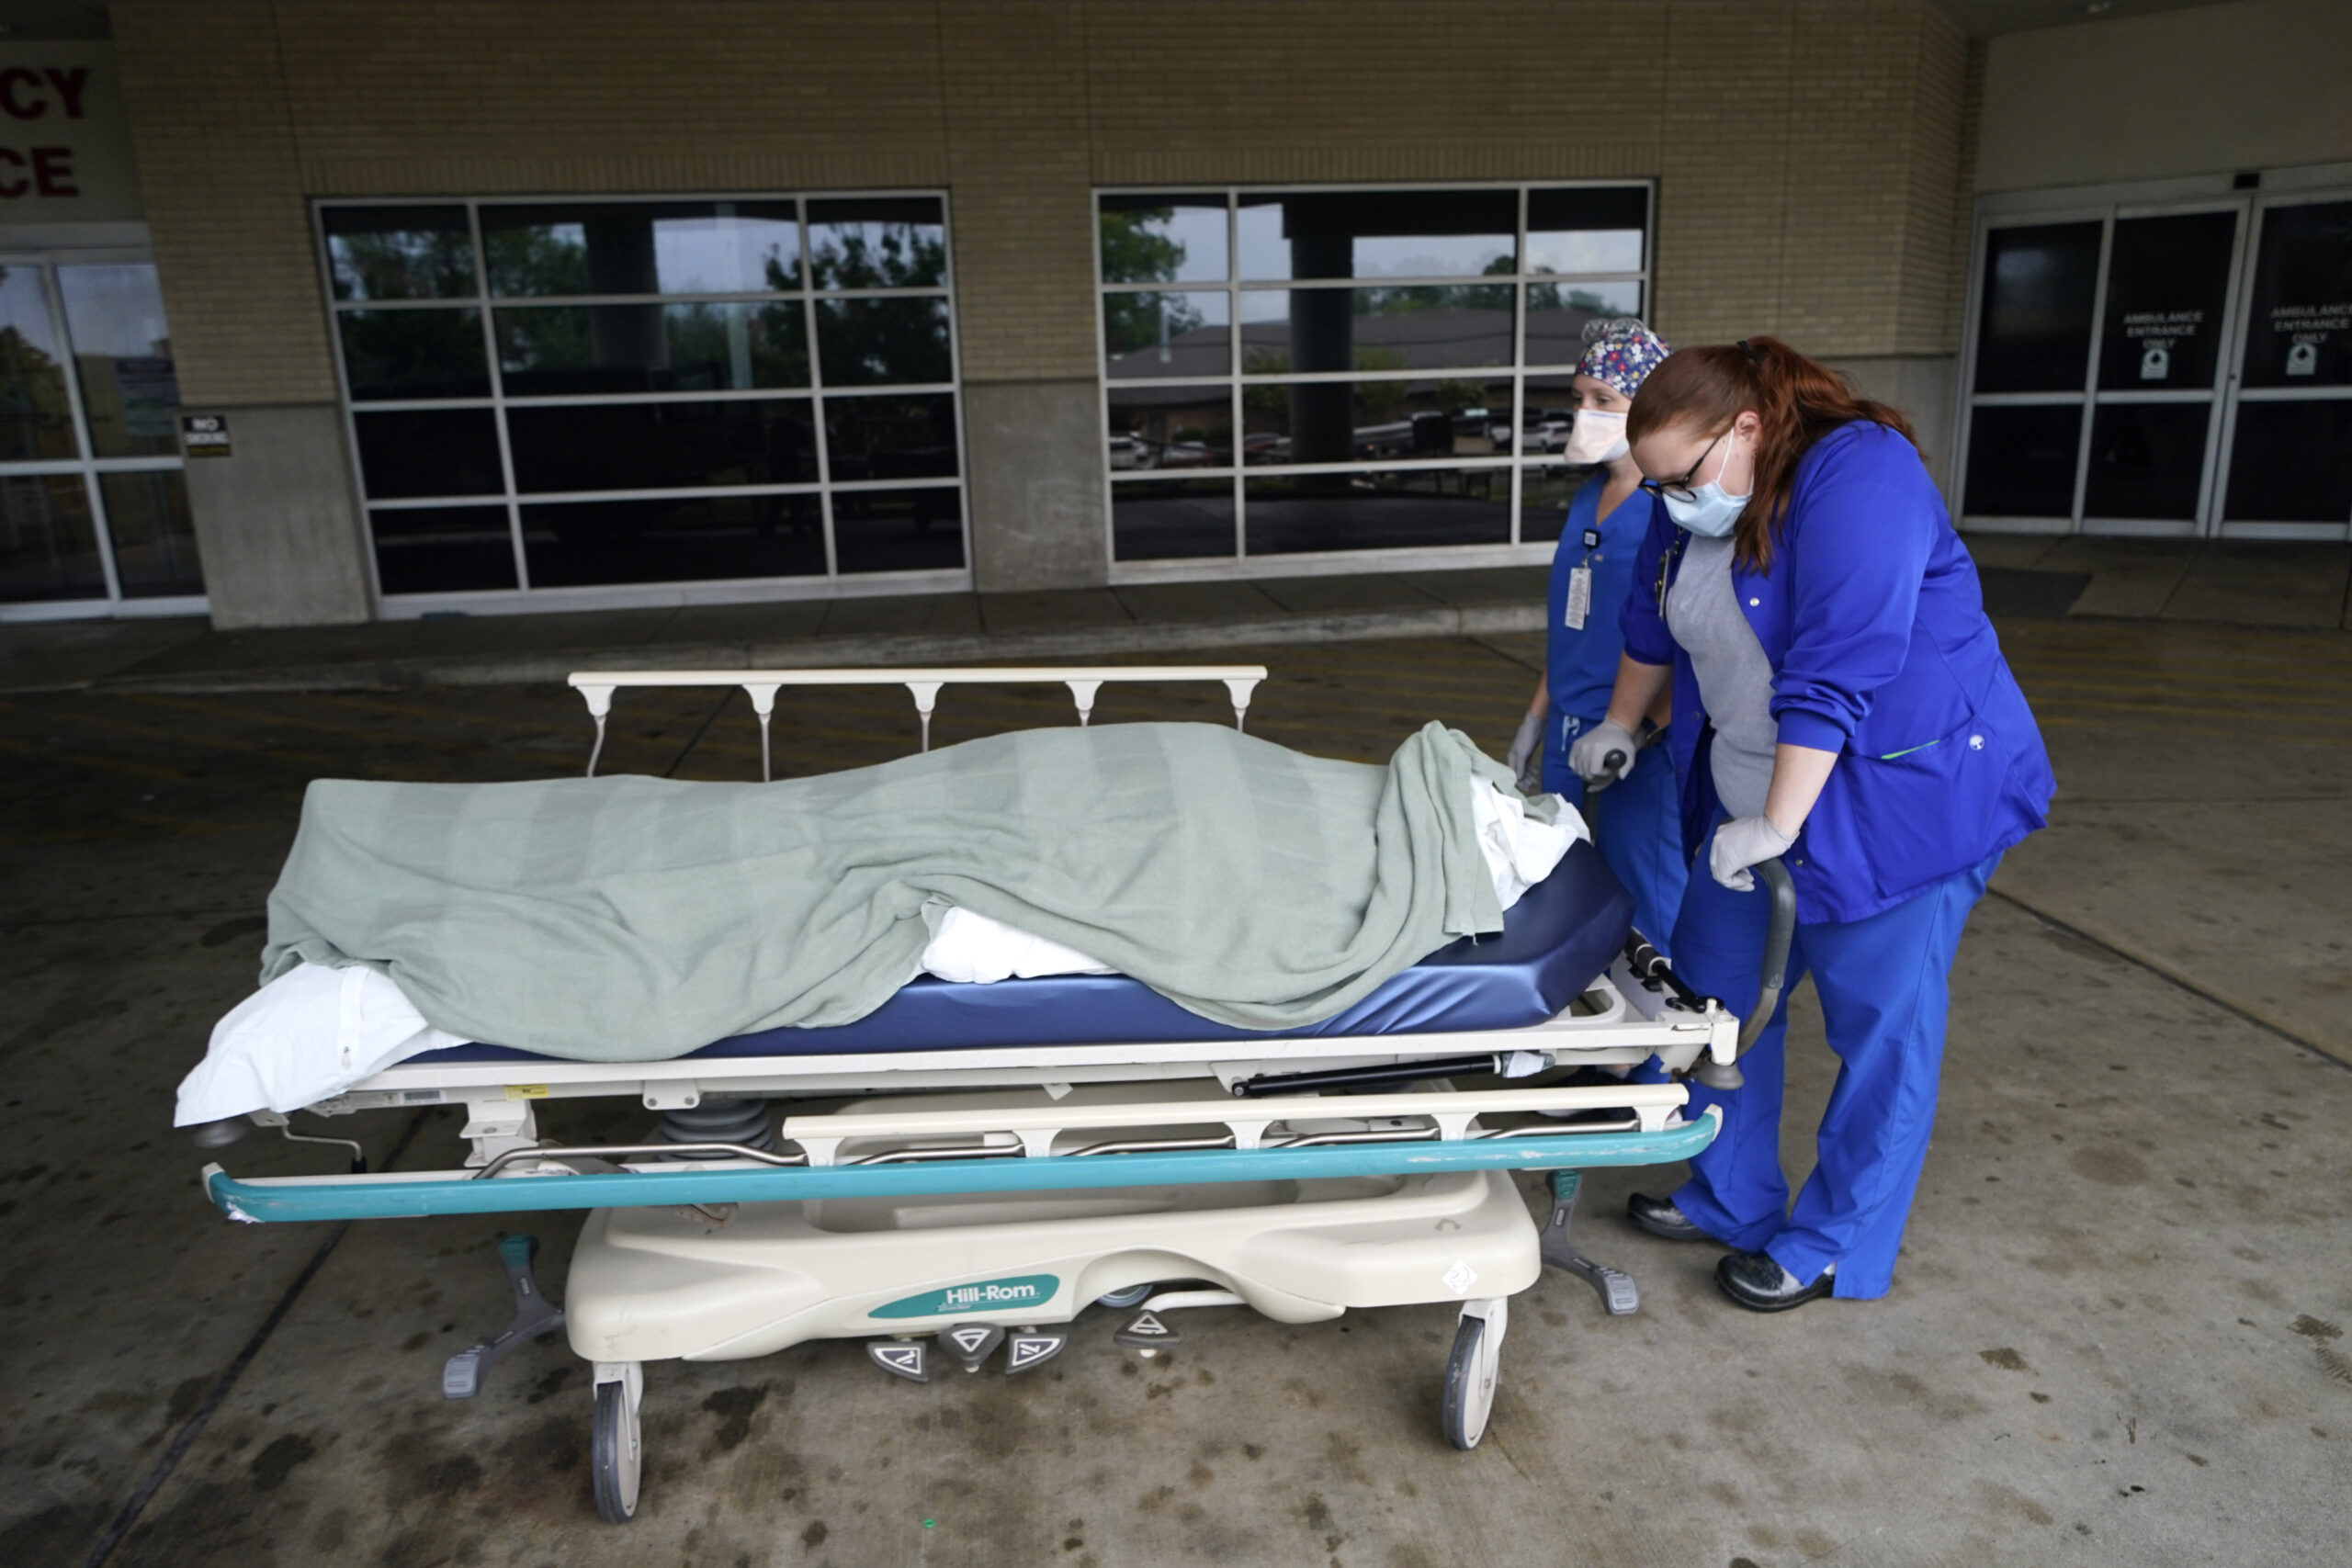 FILE - Medical staff prepare to move the body of a deceased COVID-19 patient to a funeral home van at the Willis-Knighton Medical Center in Shreveport, La., Wednesday, Aug. 18, 2021. Data released by the Centers for Disease Control and Prevention in April 2022 confirms that 2021 was the deadliest year in U.S. history. (AP Photo/Gerald Herbert, File)